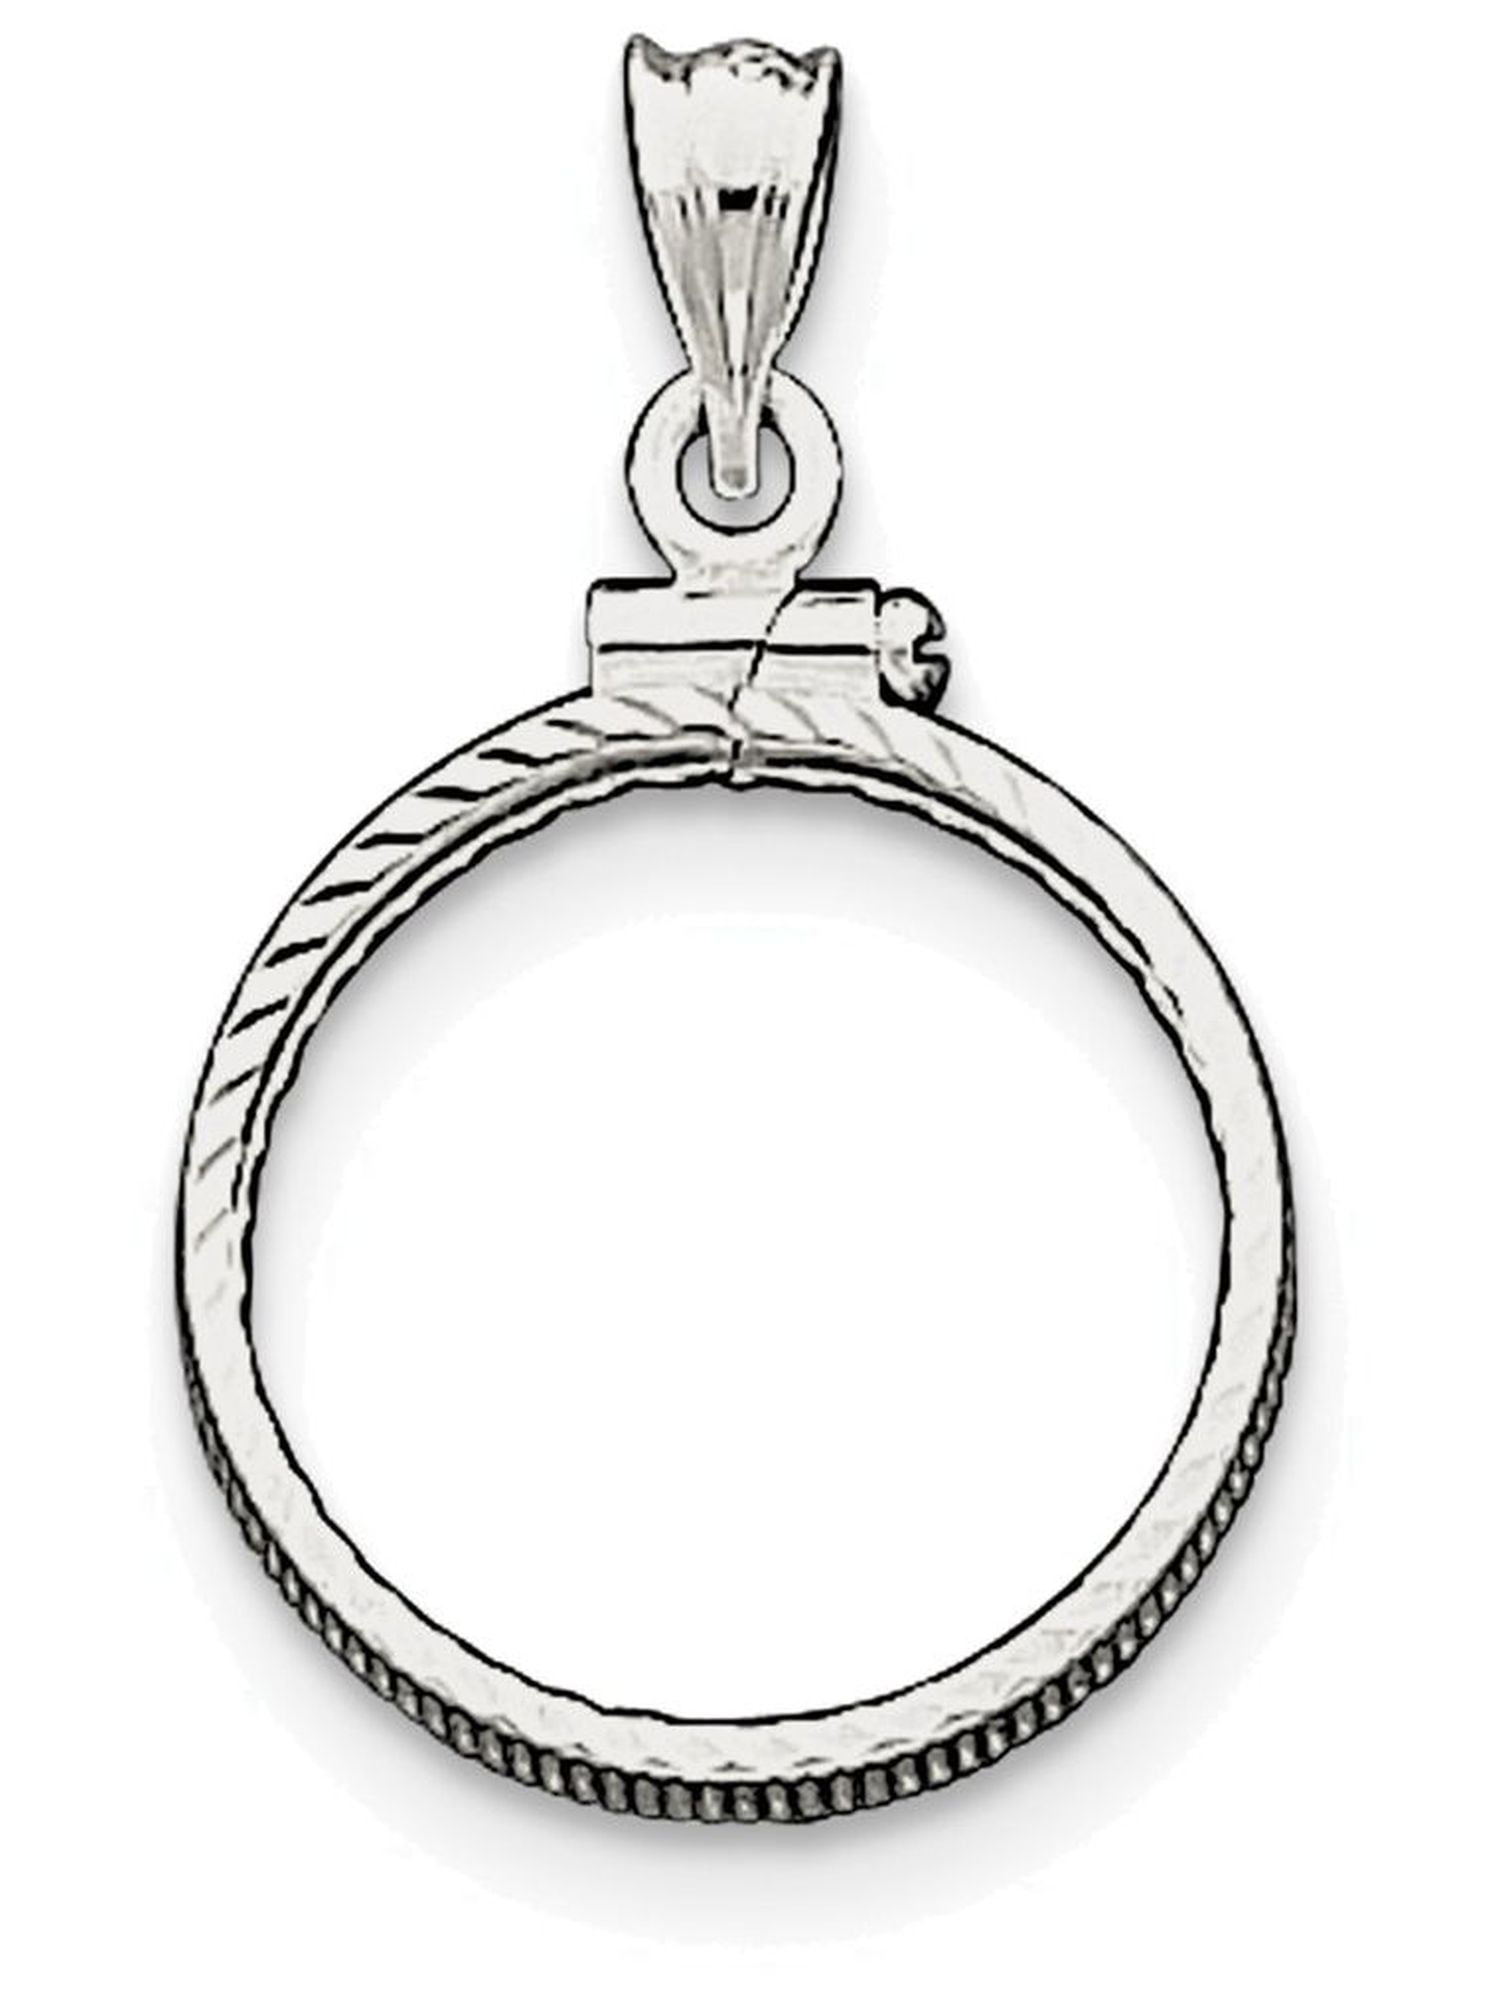 1.5 ct White Sapphire Bezel Slider Necklace in Solid Sterling Silver